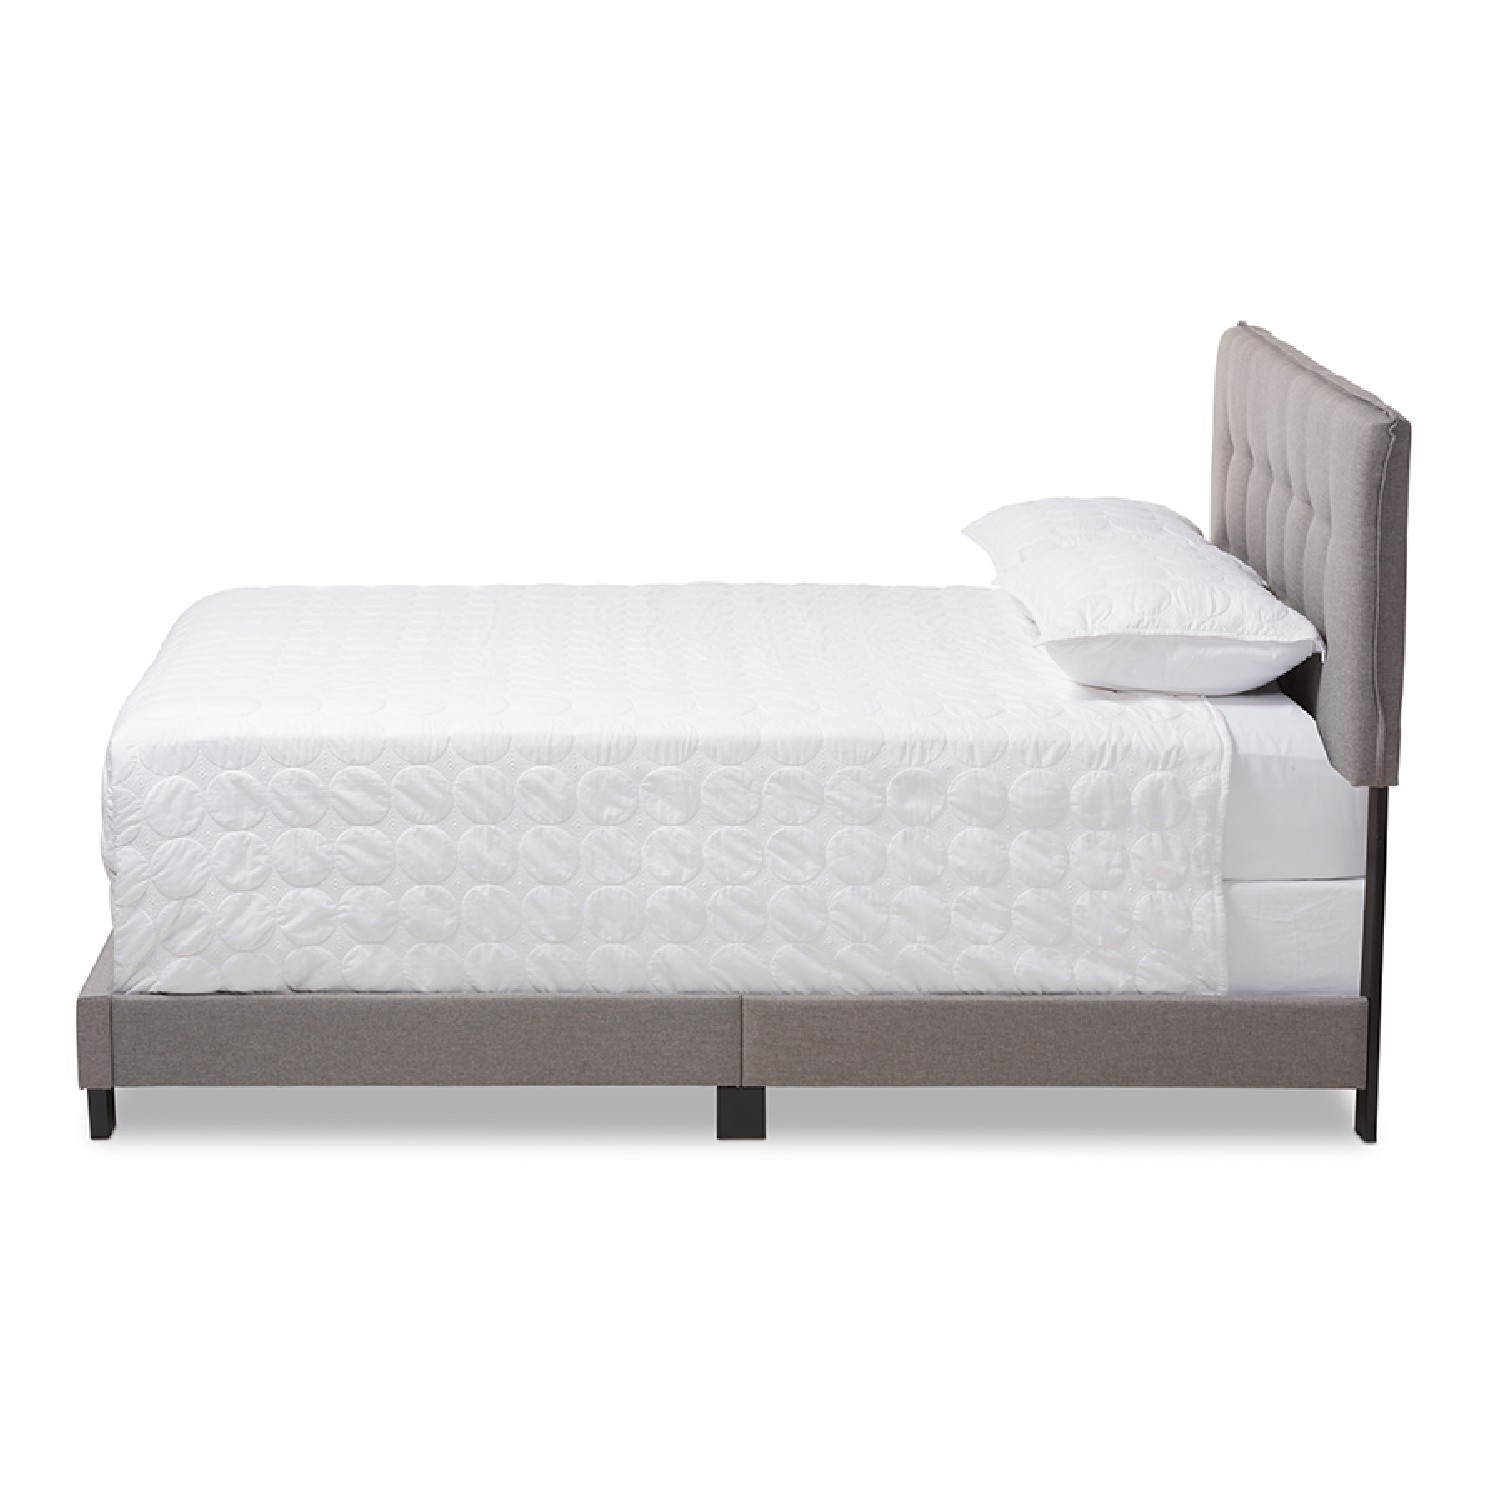 Baxton Studio Audrey Modern and Contemporary Upholstered Bed, Multiple Sizes, Multiple Colors - image 2 of 7